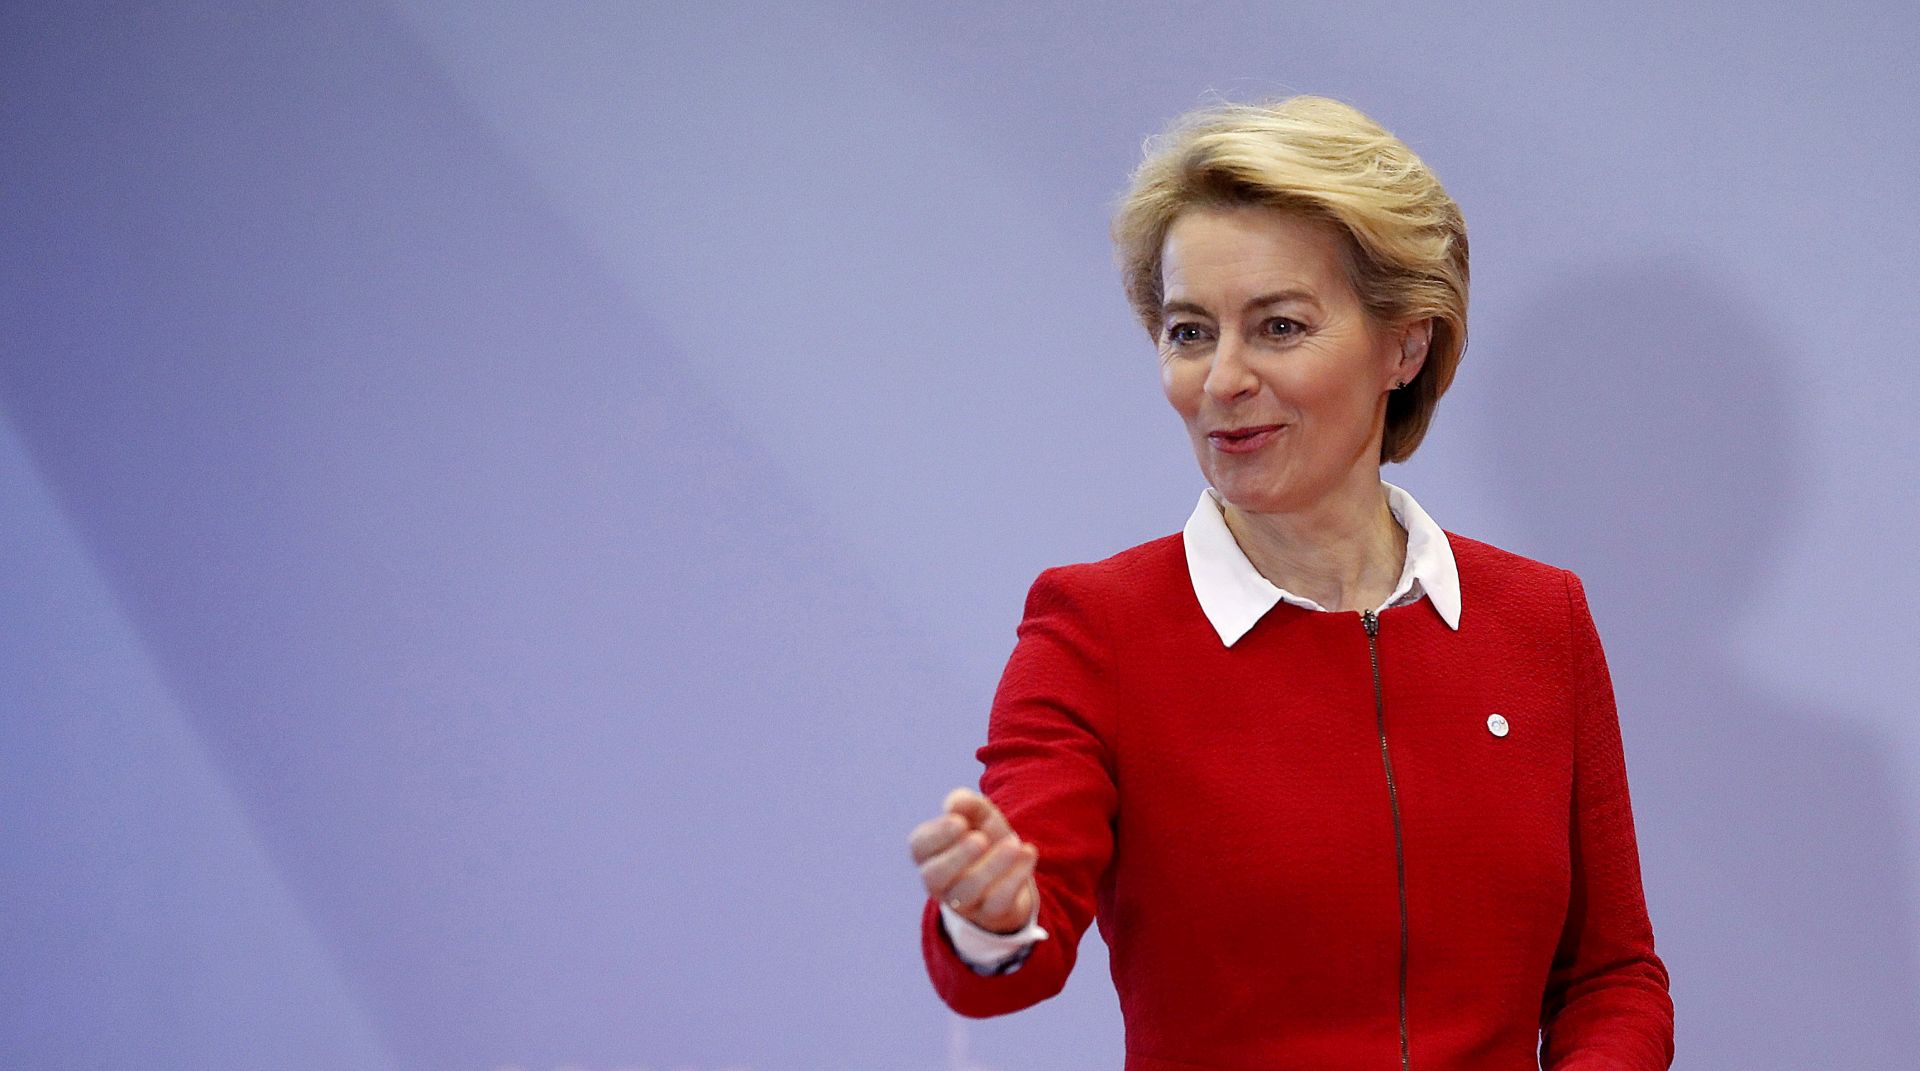 epa08038744 President of the European Commission Ursula von der Leyen arrives for the opening ceremony of the COP25 Climate Summit held in Madrid, Spain, 02 December 2019. The UN Climate Change Conference COP25 runs from 02 to 13 December 2019 in the Spanish capital.  EPA/ZIPI